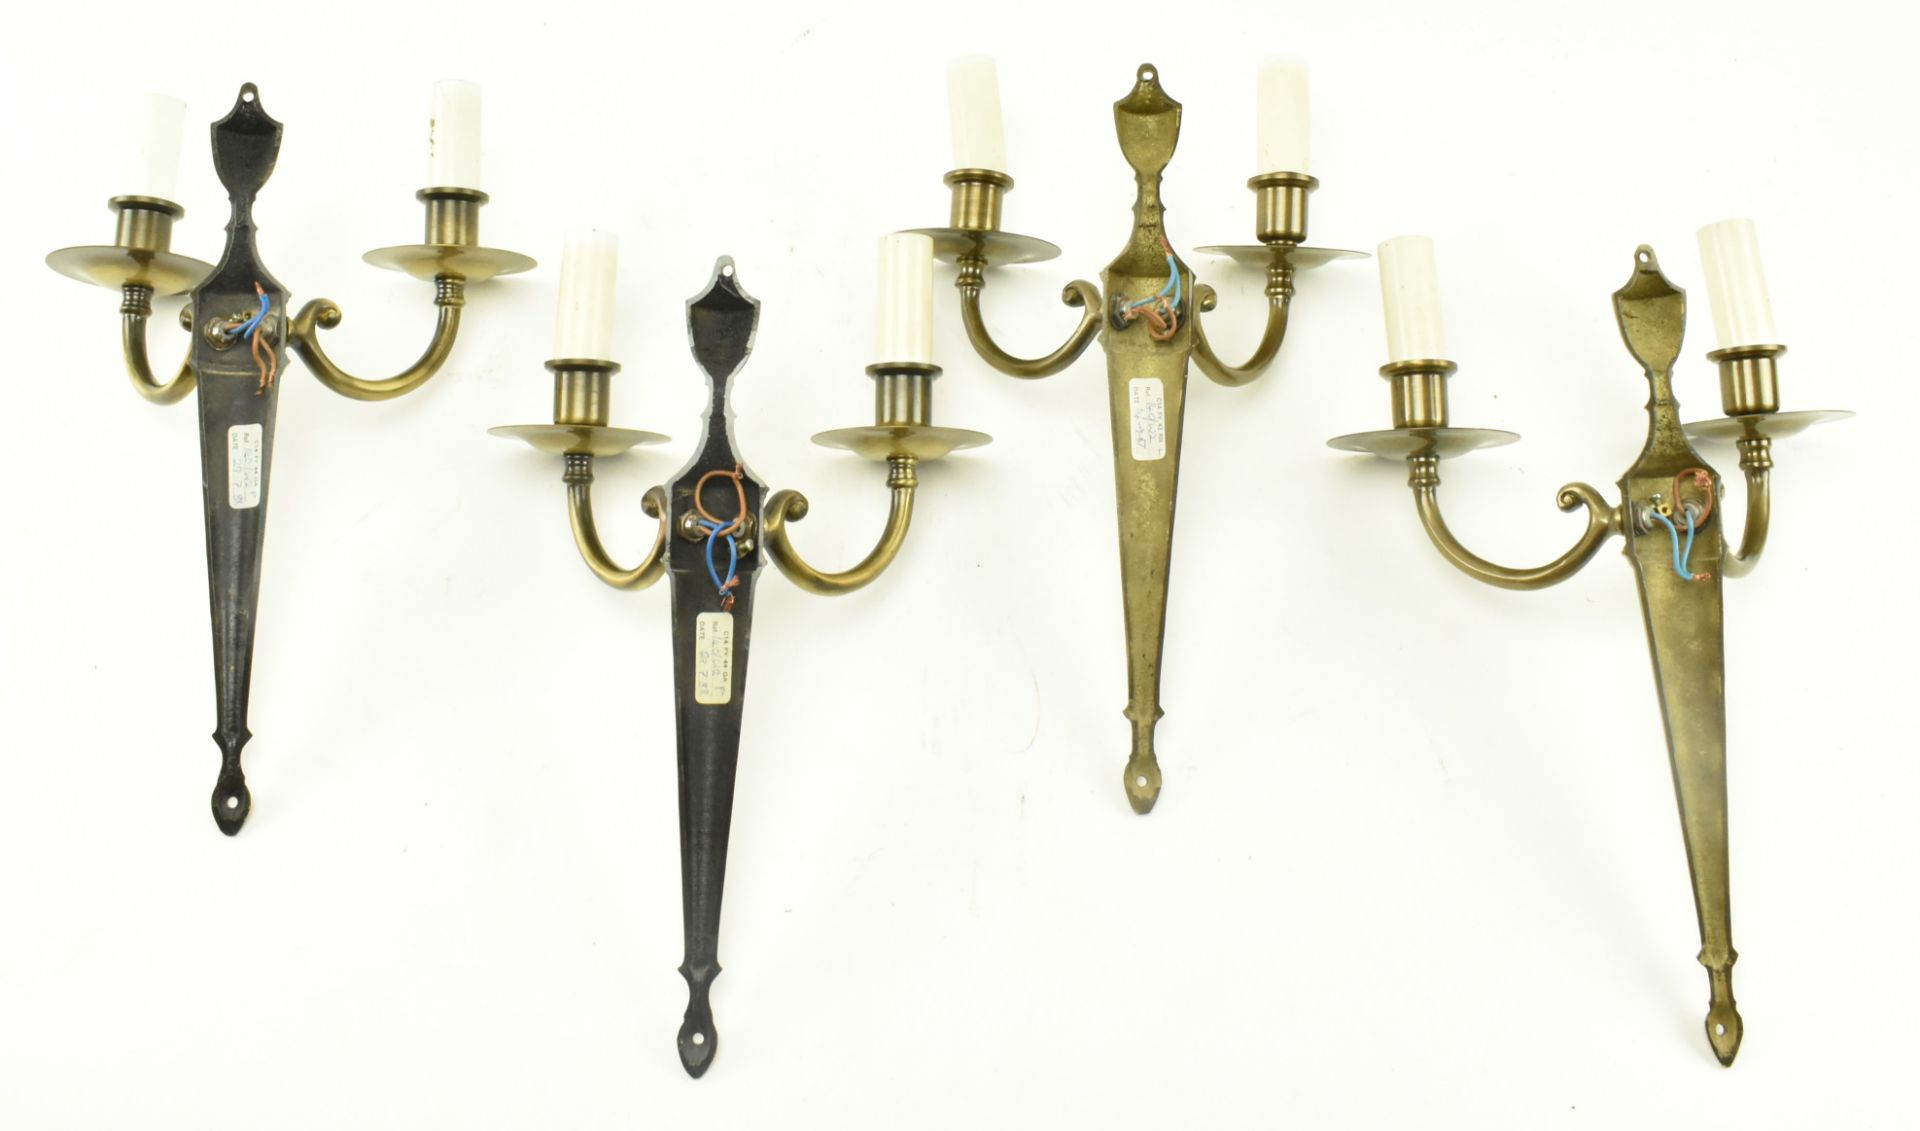 FOUR ITALIAN MANNER 20TH CENTURY BRASS WALL SCONCES - Image 6 of 7